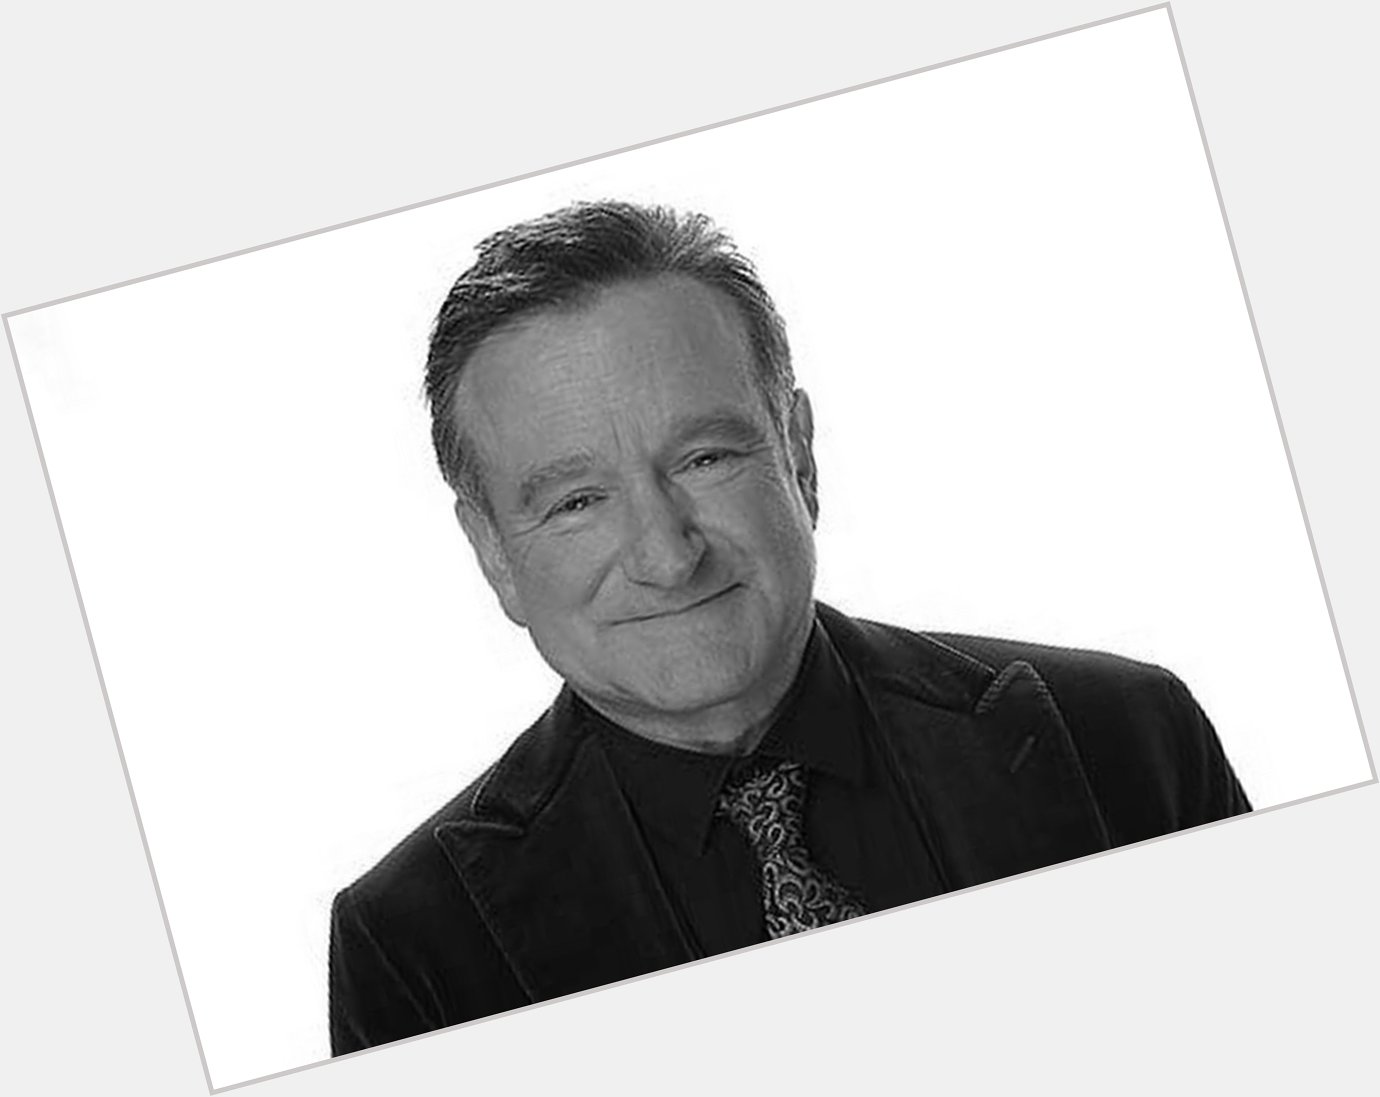 Happy birthday Robin Williams, the world misses you more and more everyday. 